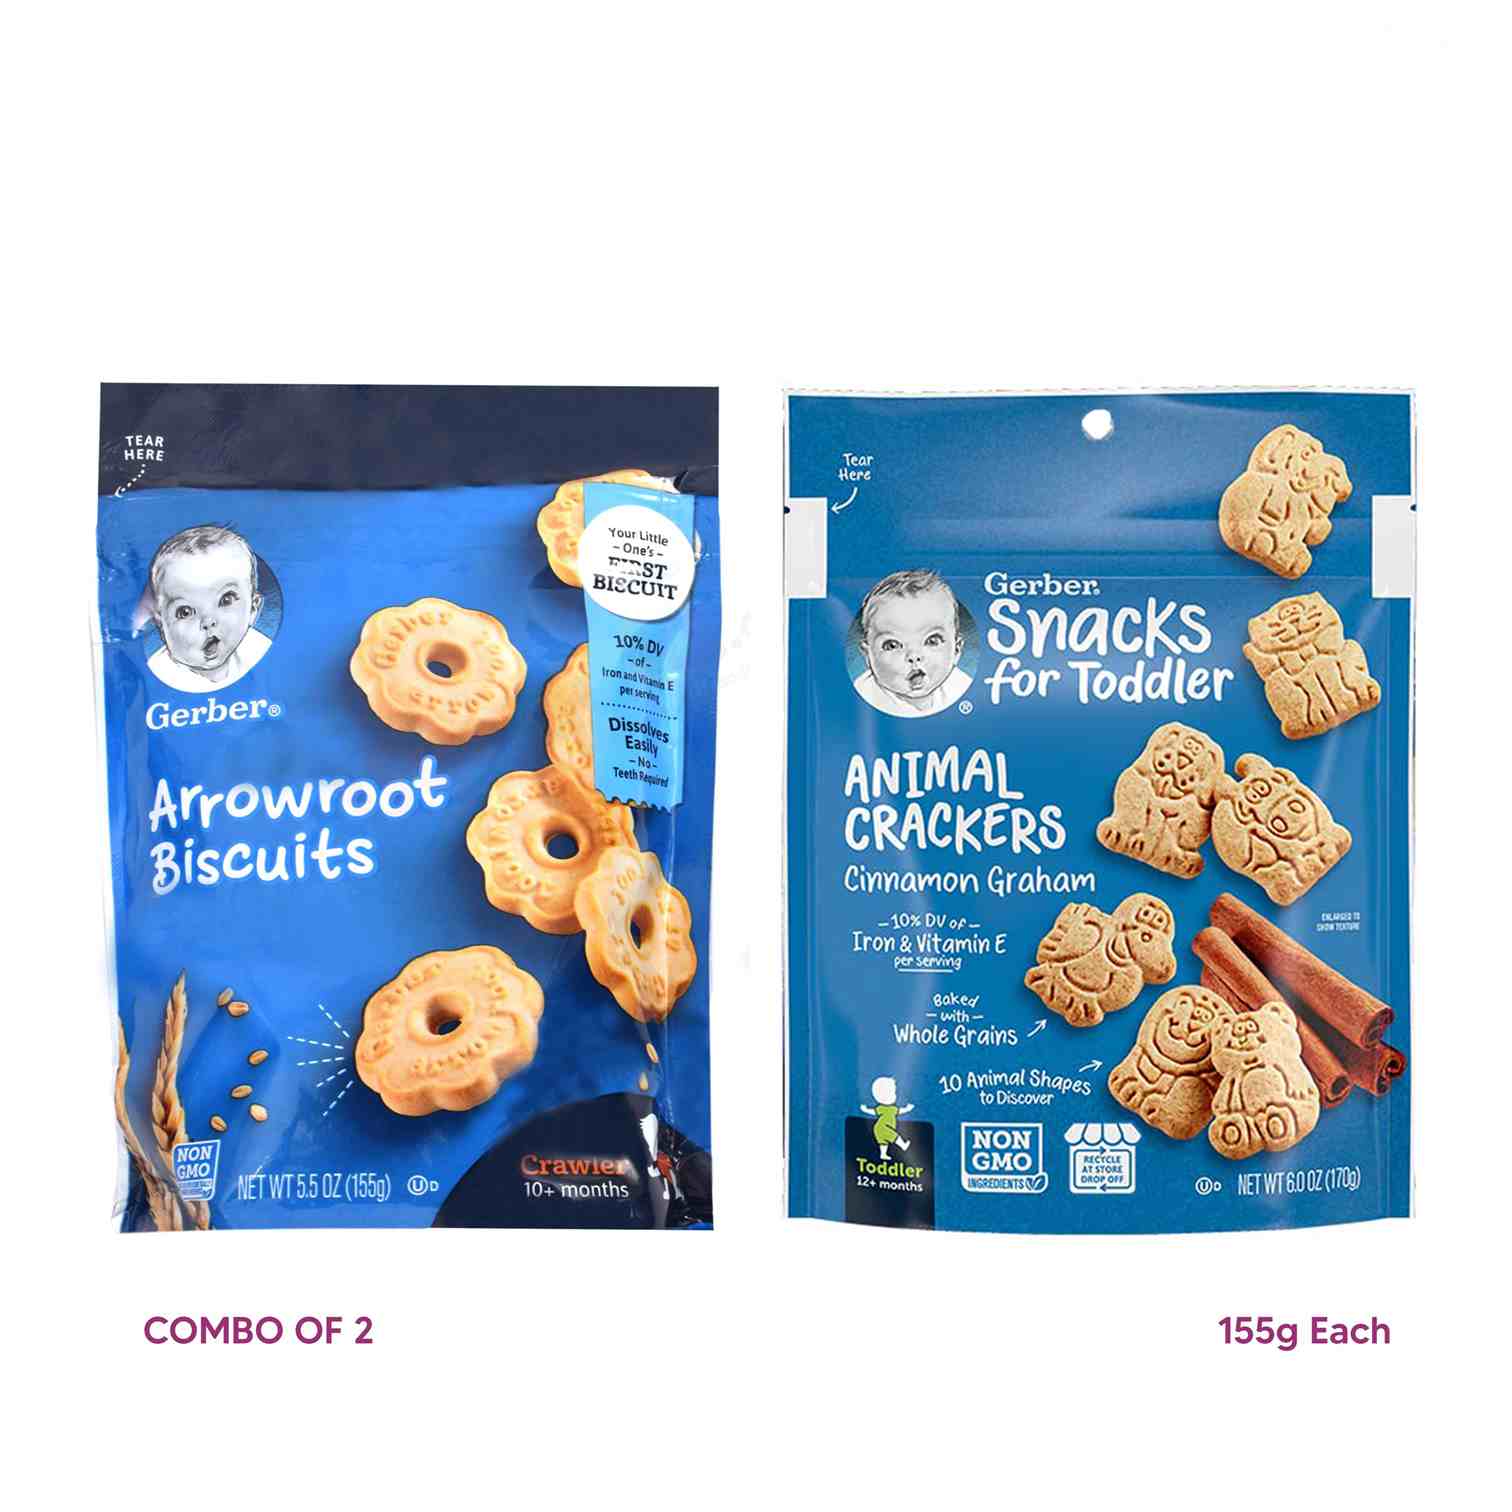 GERBER Biscuits - arrowroot & animal crackers, naturally flavored biscuits for babies, combo of 2 - 325g - 10 months +